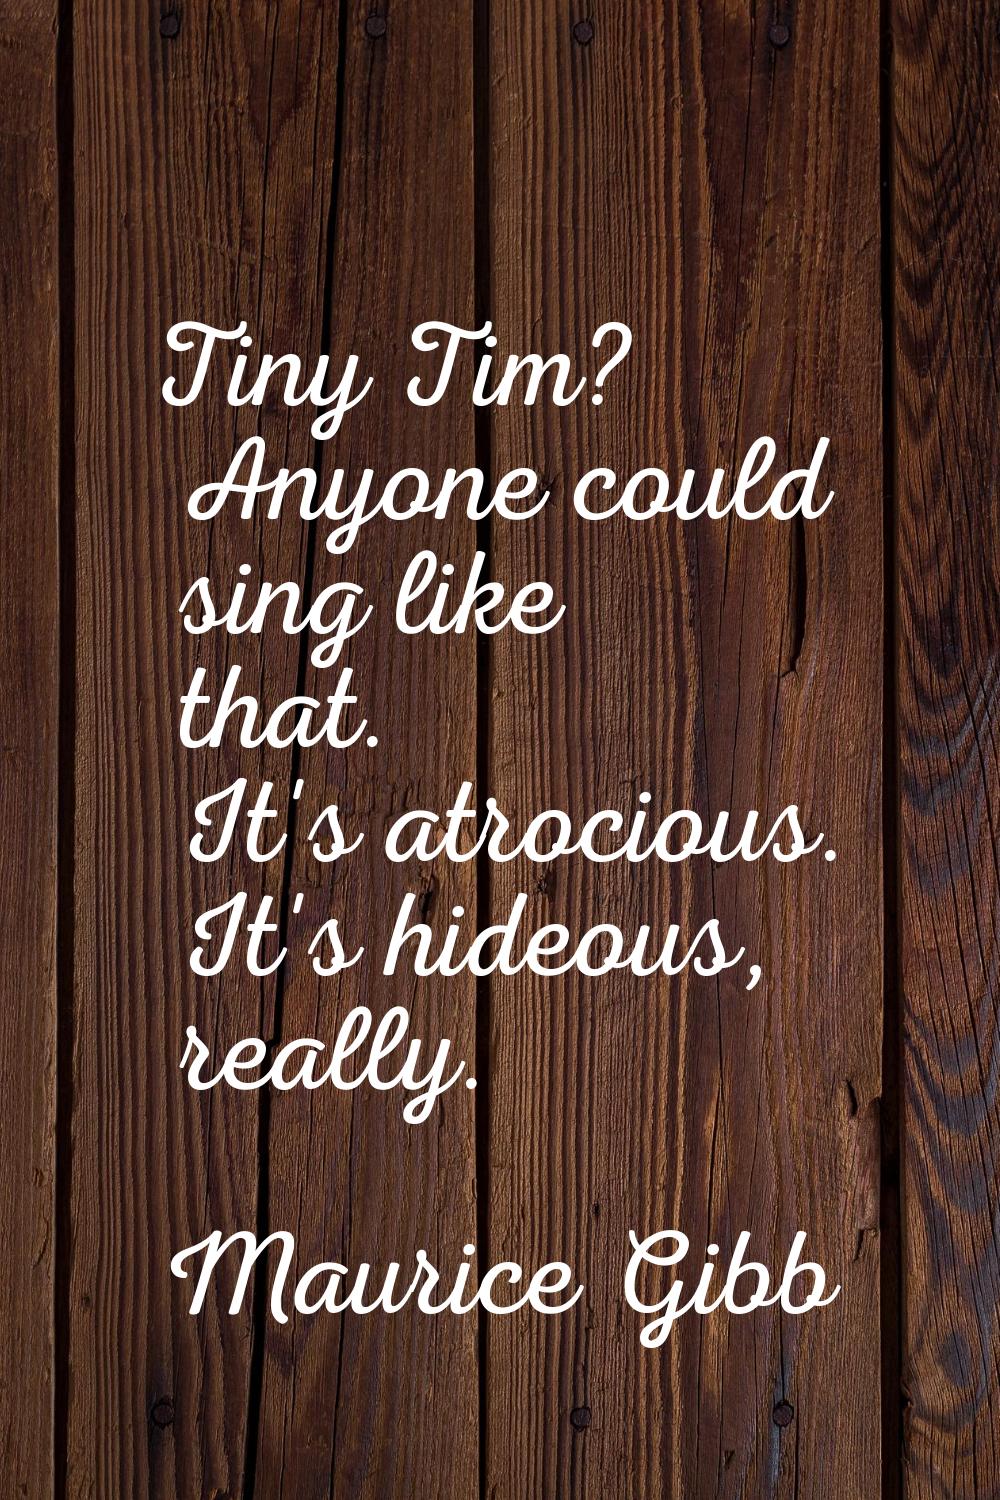 Tiny Tim? Anyone could sing like that. It's atrocious. It's hideous, really.